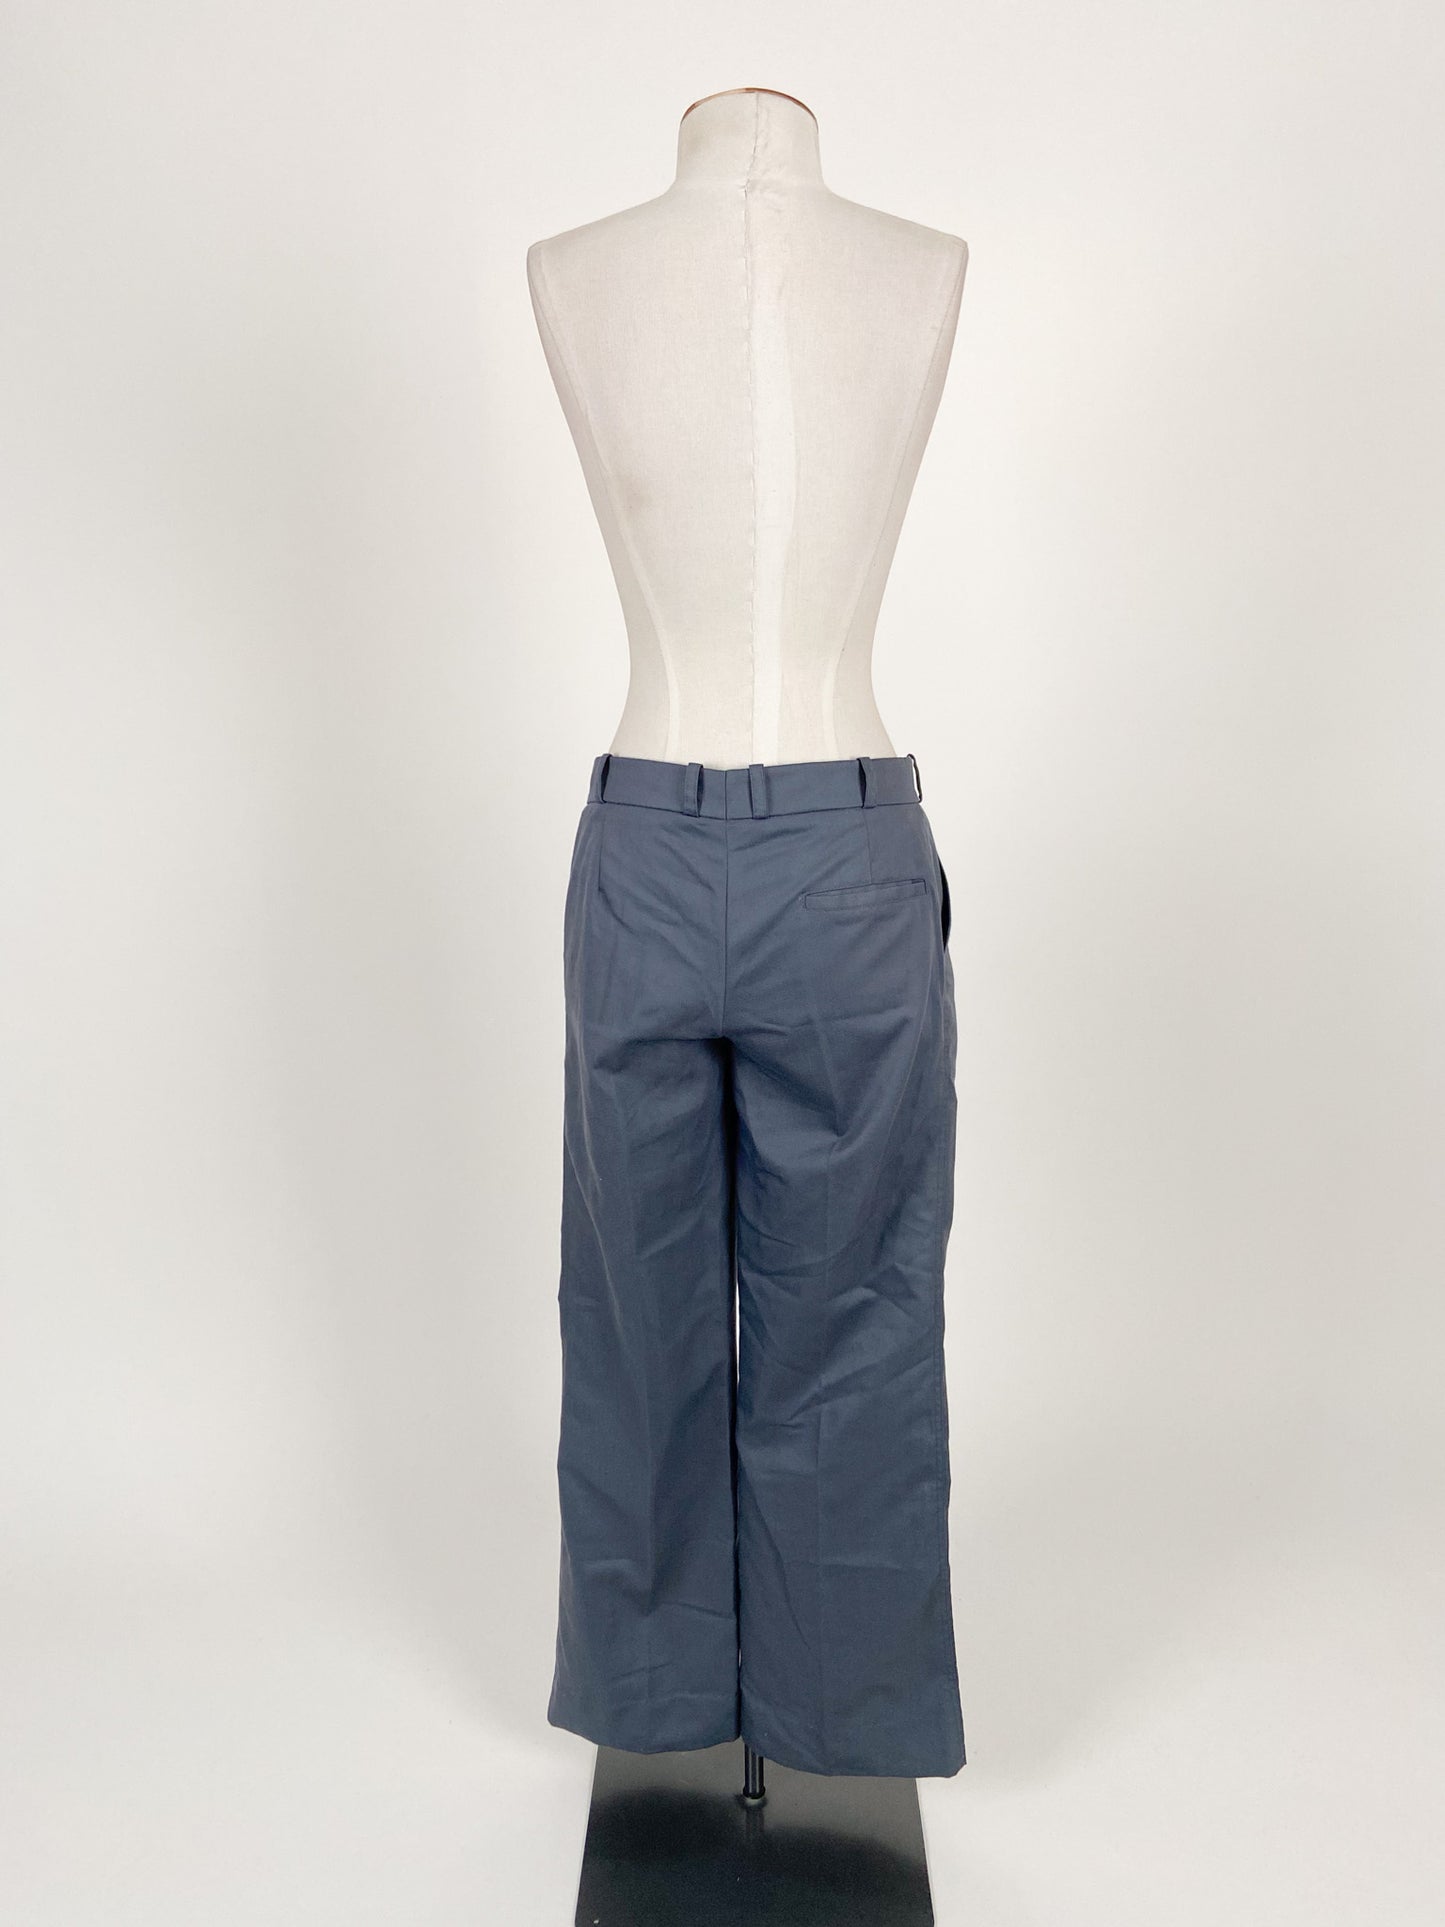 Unknown Brand | Grey Pleated Straight fit Pants | Size S